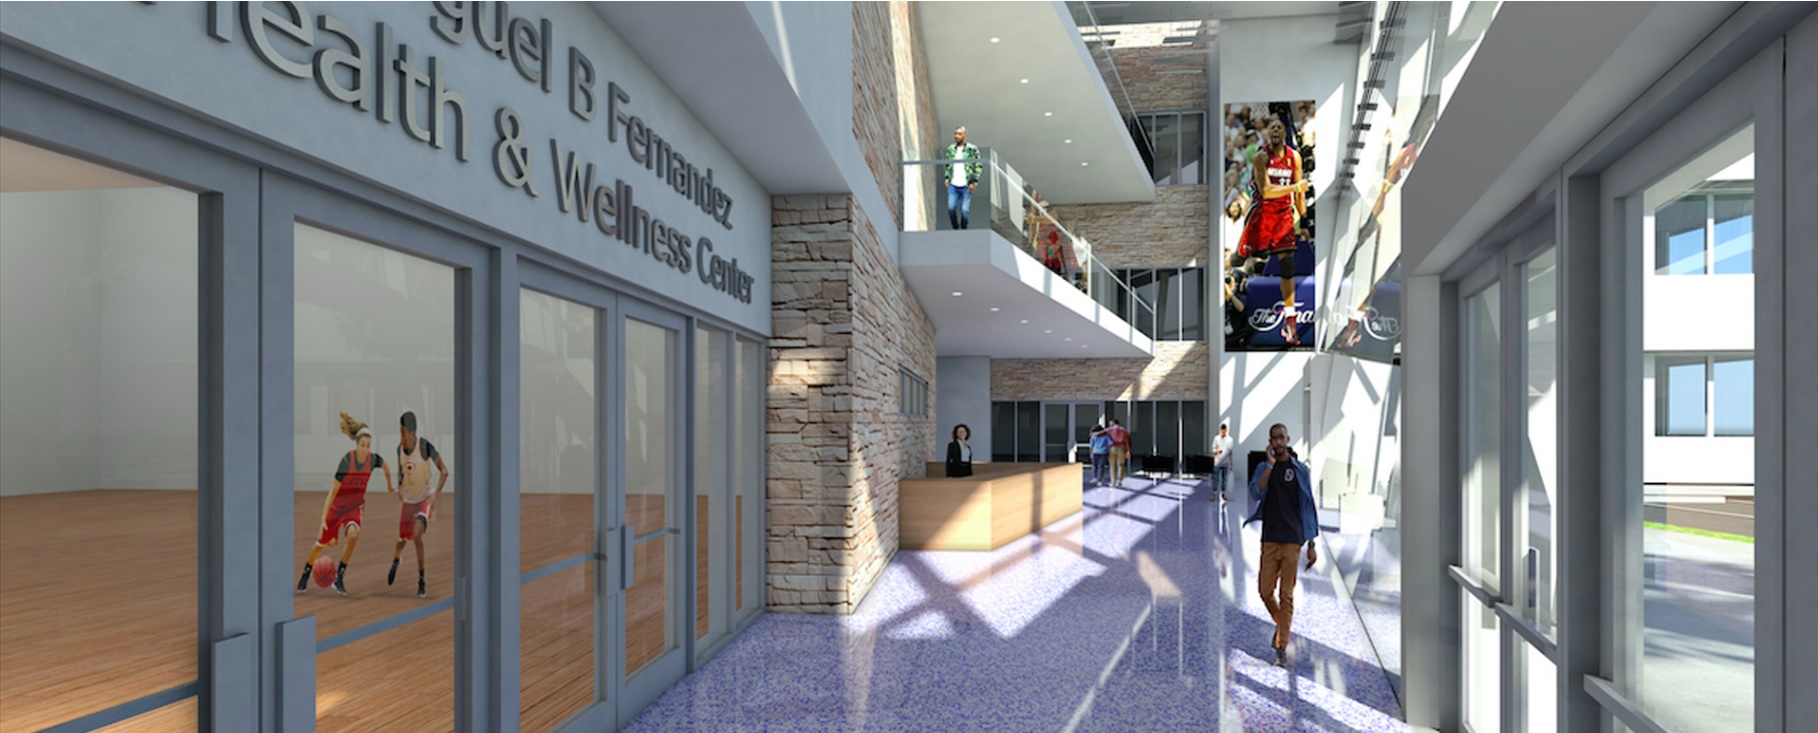 overtown-youth-ctr_promotionalmaterial_rendering1-2